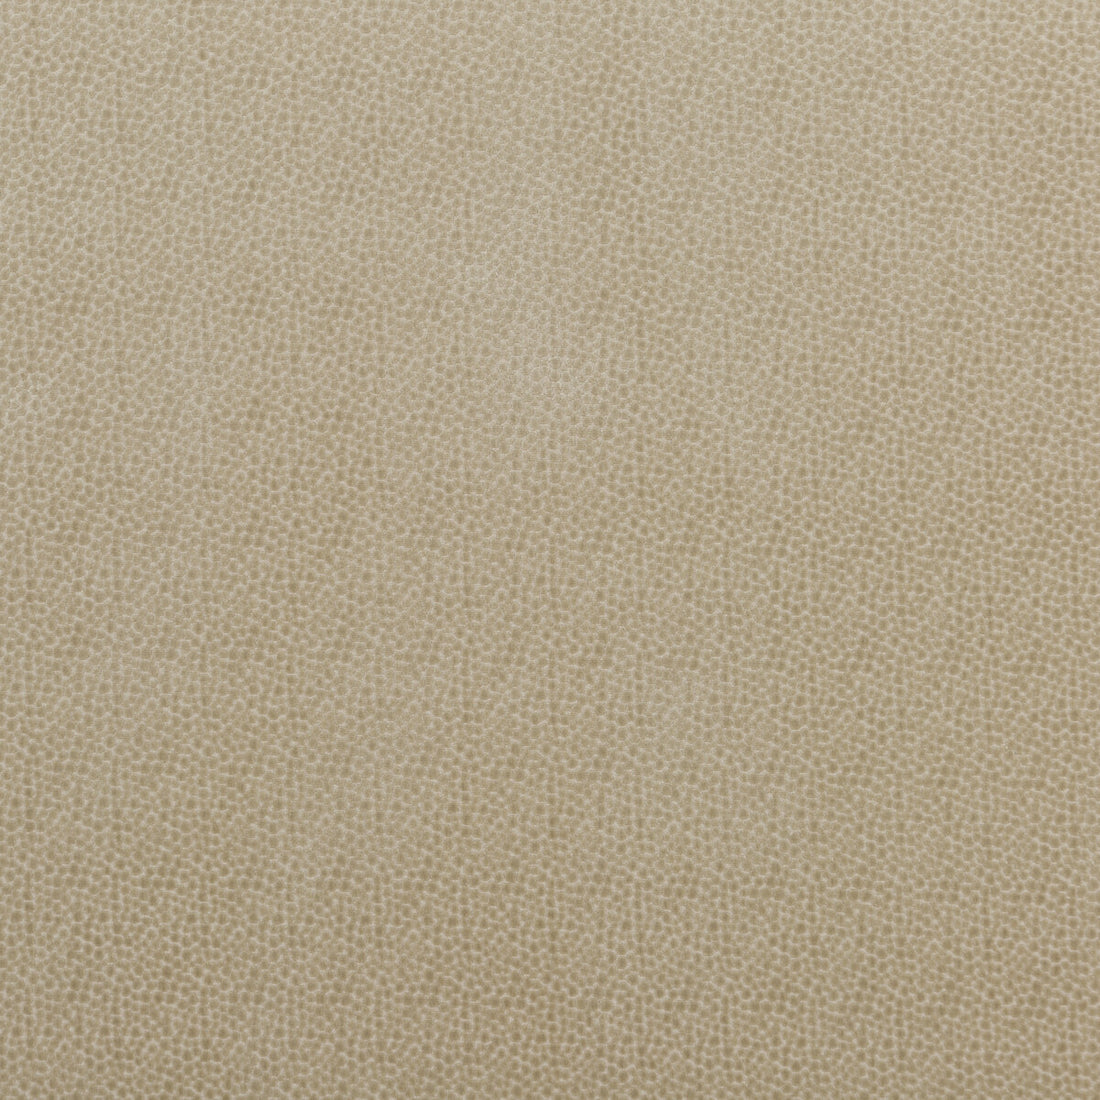 Salsa Spot fabric in parchment color - pattern PF50423.225.0 - by Baker Lifestyle in the Carnival collection